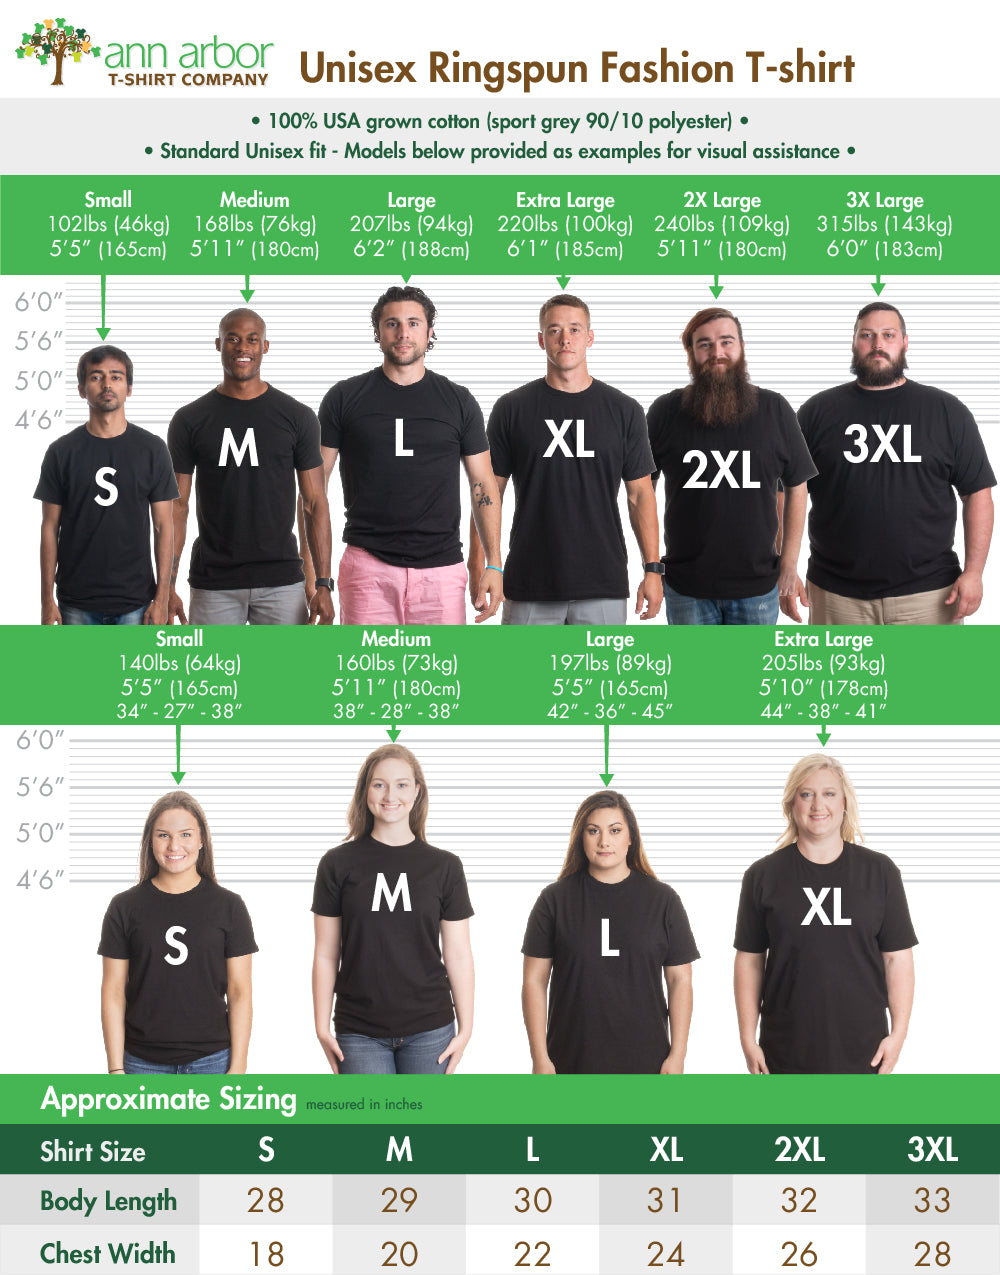 Size Chart showing Real Men and Real Women in each size